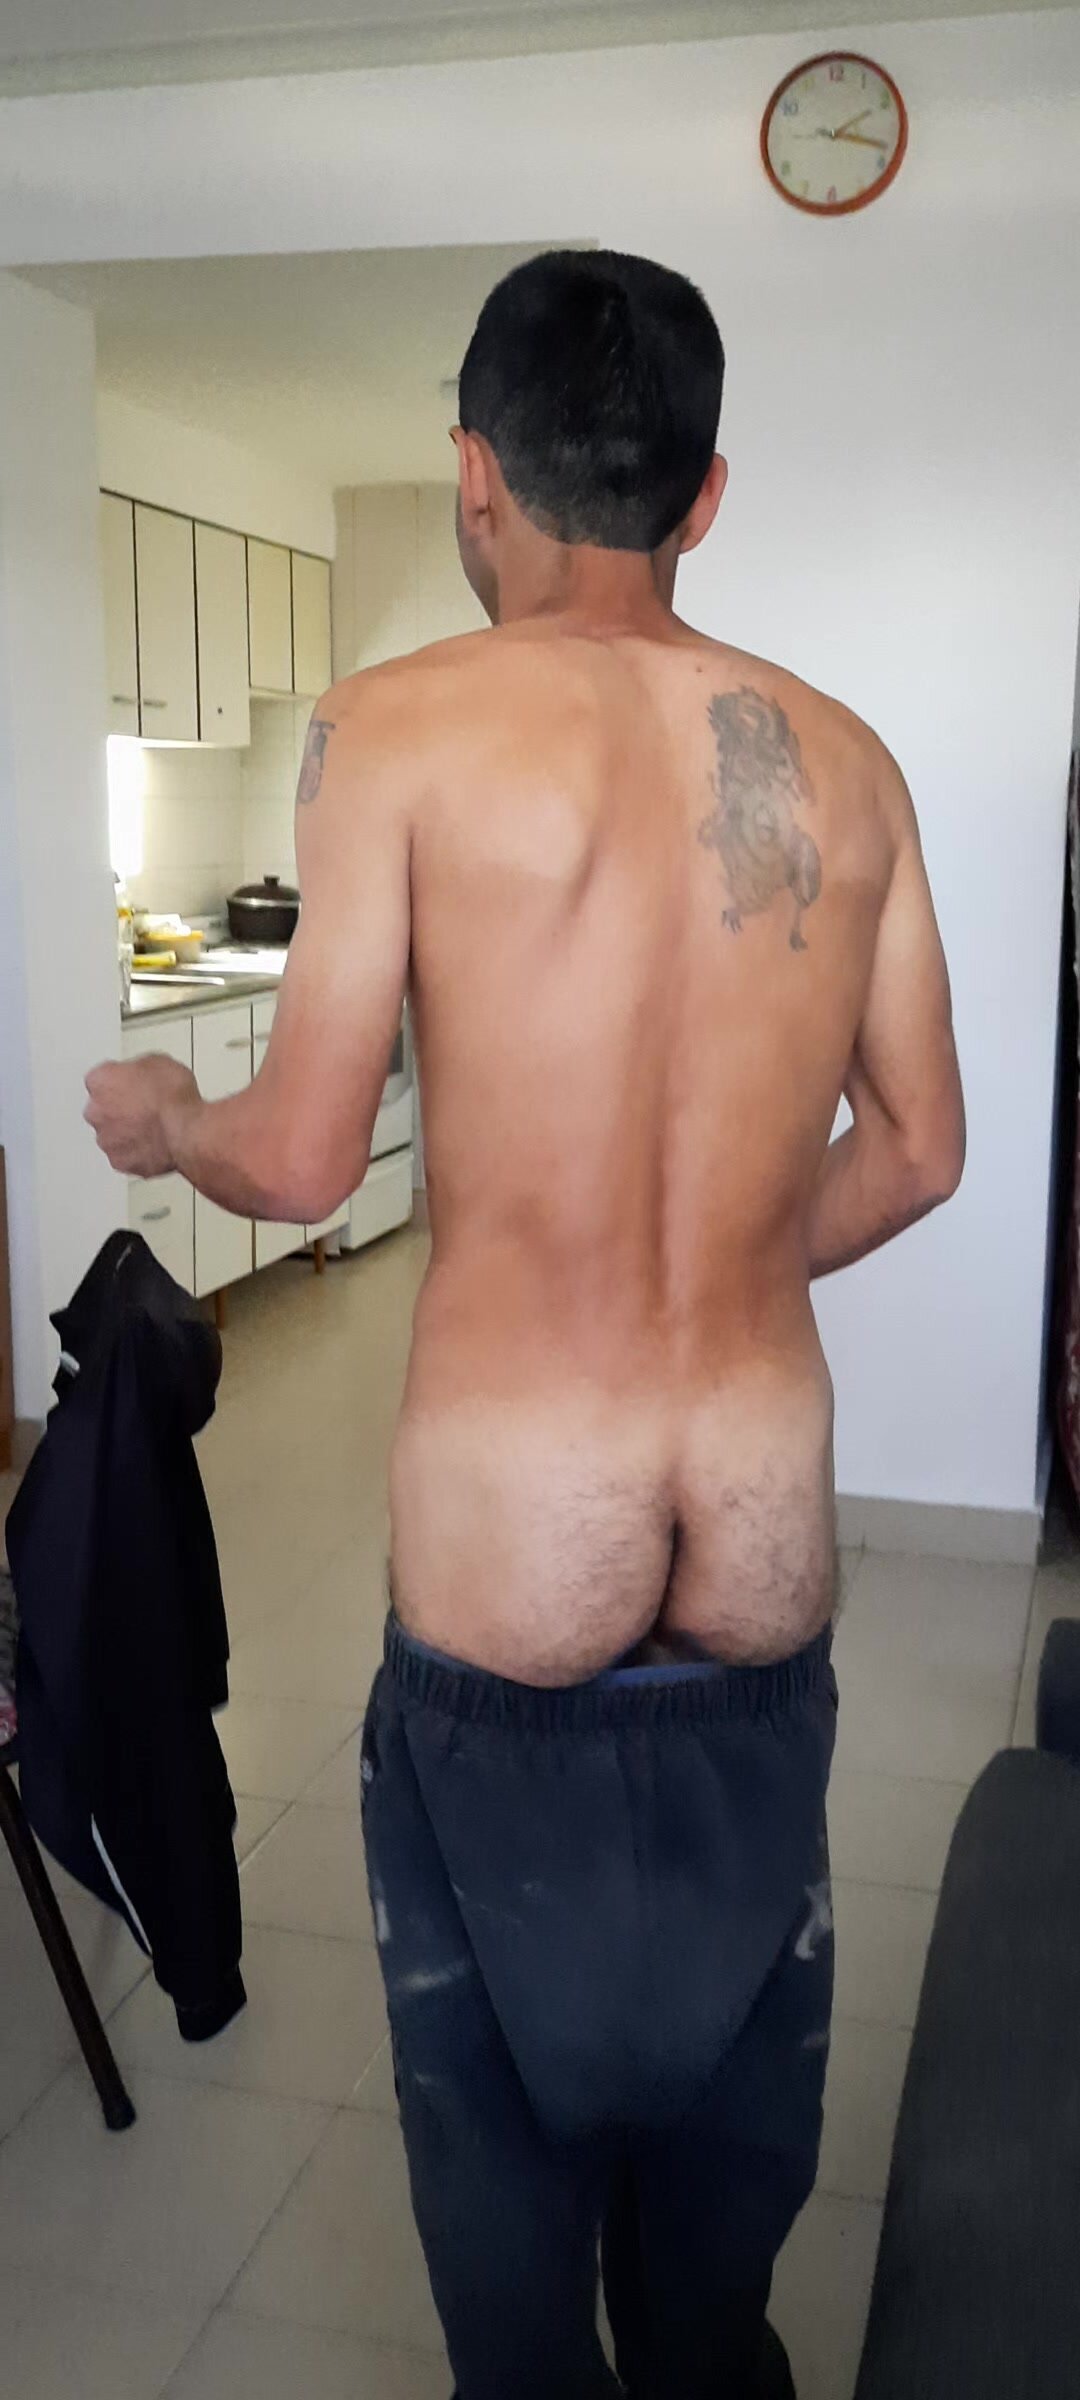 Straight man dancing ass naked for Money